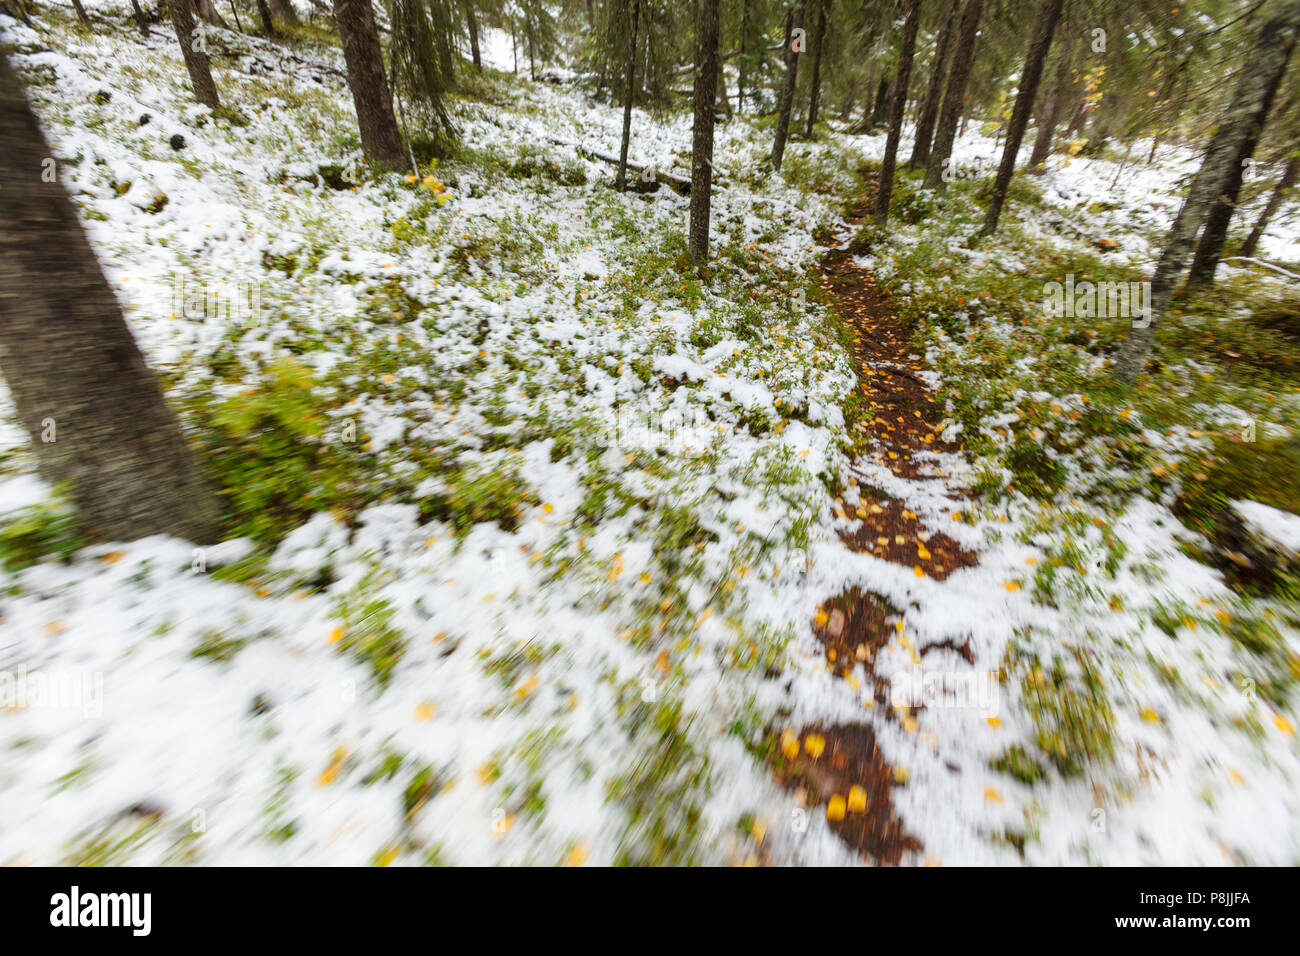 dynamic moving image suggesting walking or running on a snowy forest trail Stock Photo